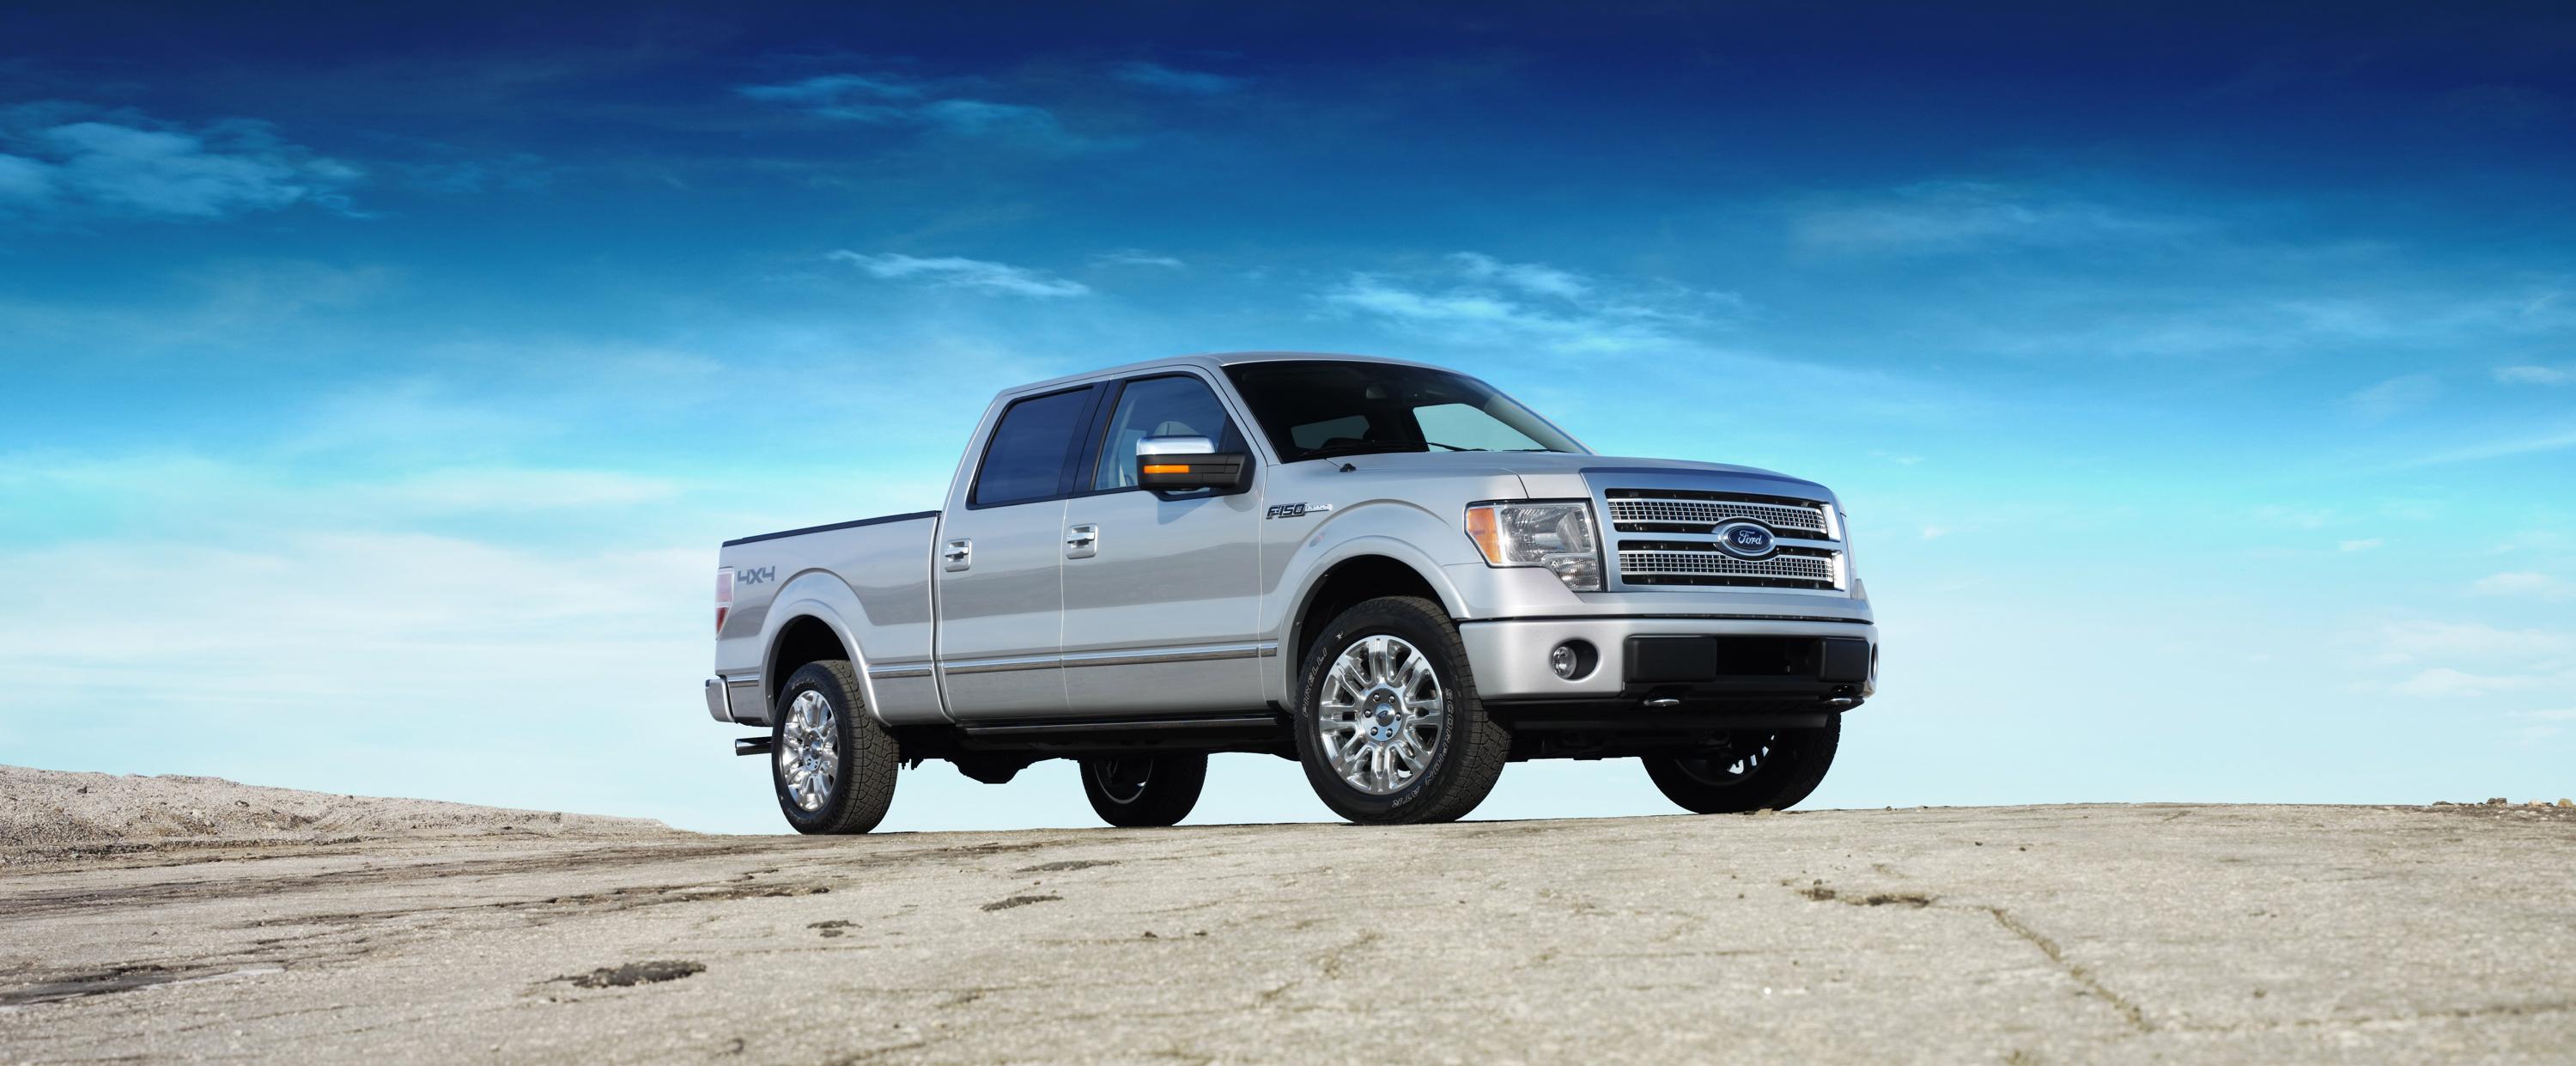 2009 Ford F-150 unsurpassed in fuel economy, capability 2009 Ford F150 4.6 L Towing Capacity